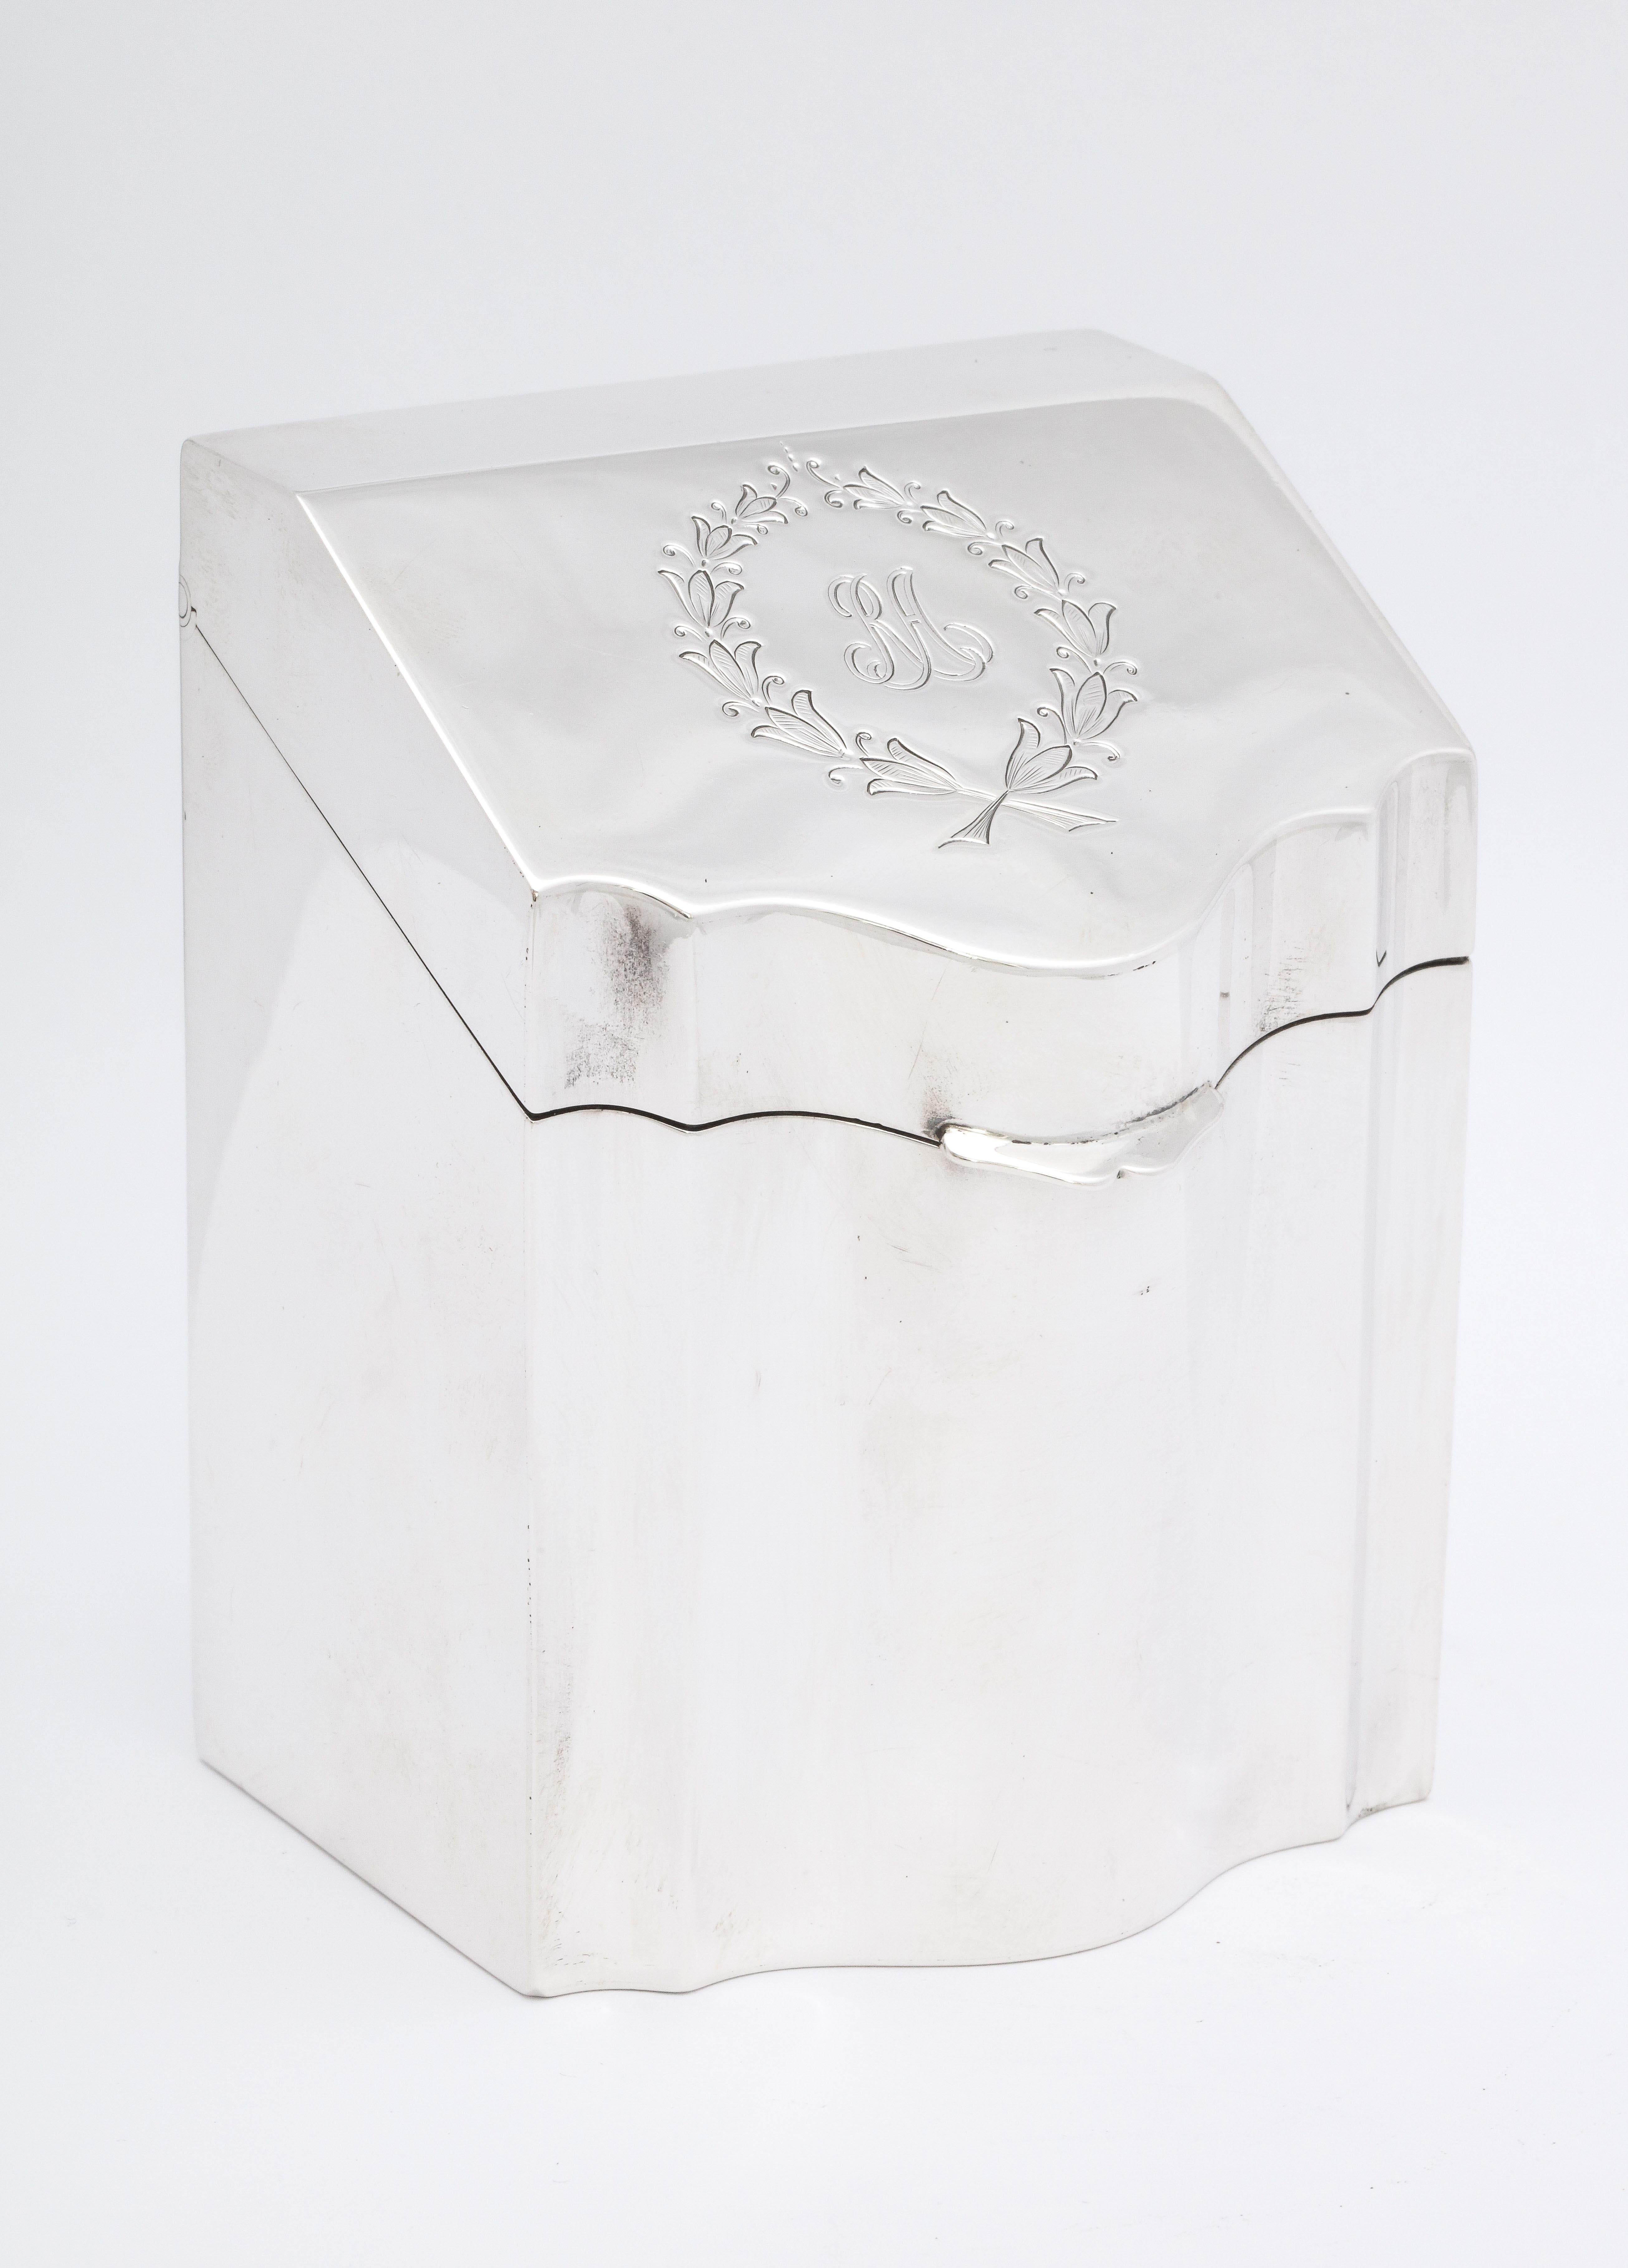 Regency style, sterling silver, knife-box-form tea caddy with hinged lid, American, Ca. 1910. Has a wreath-form cartouche, which is engraved with the script initials RA that look like they are part of the design. Measures 4 inches high at highest